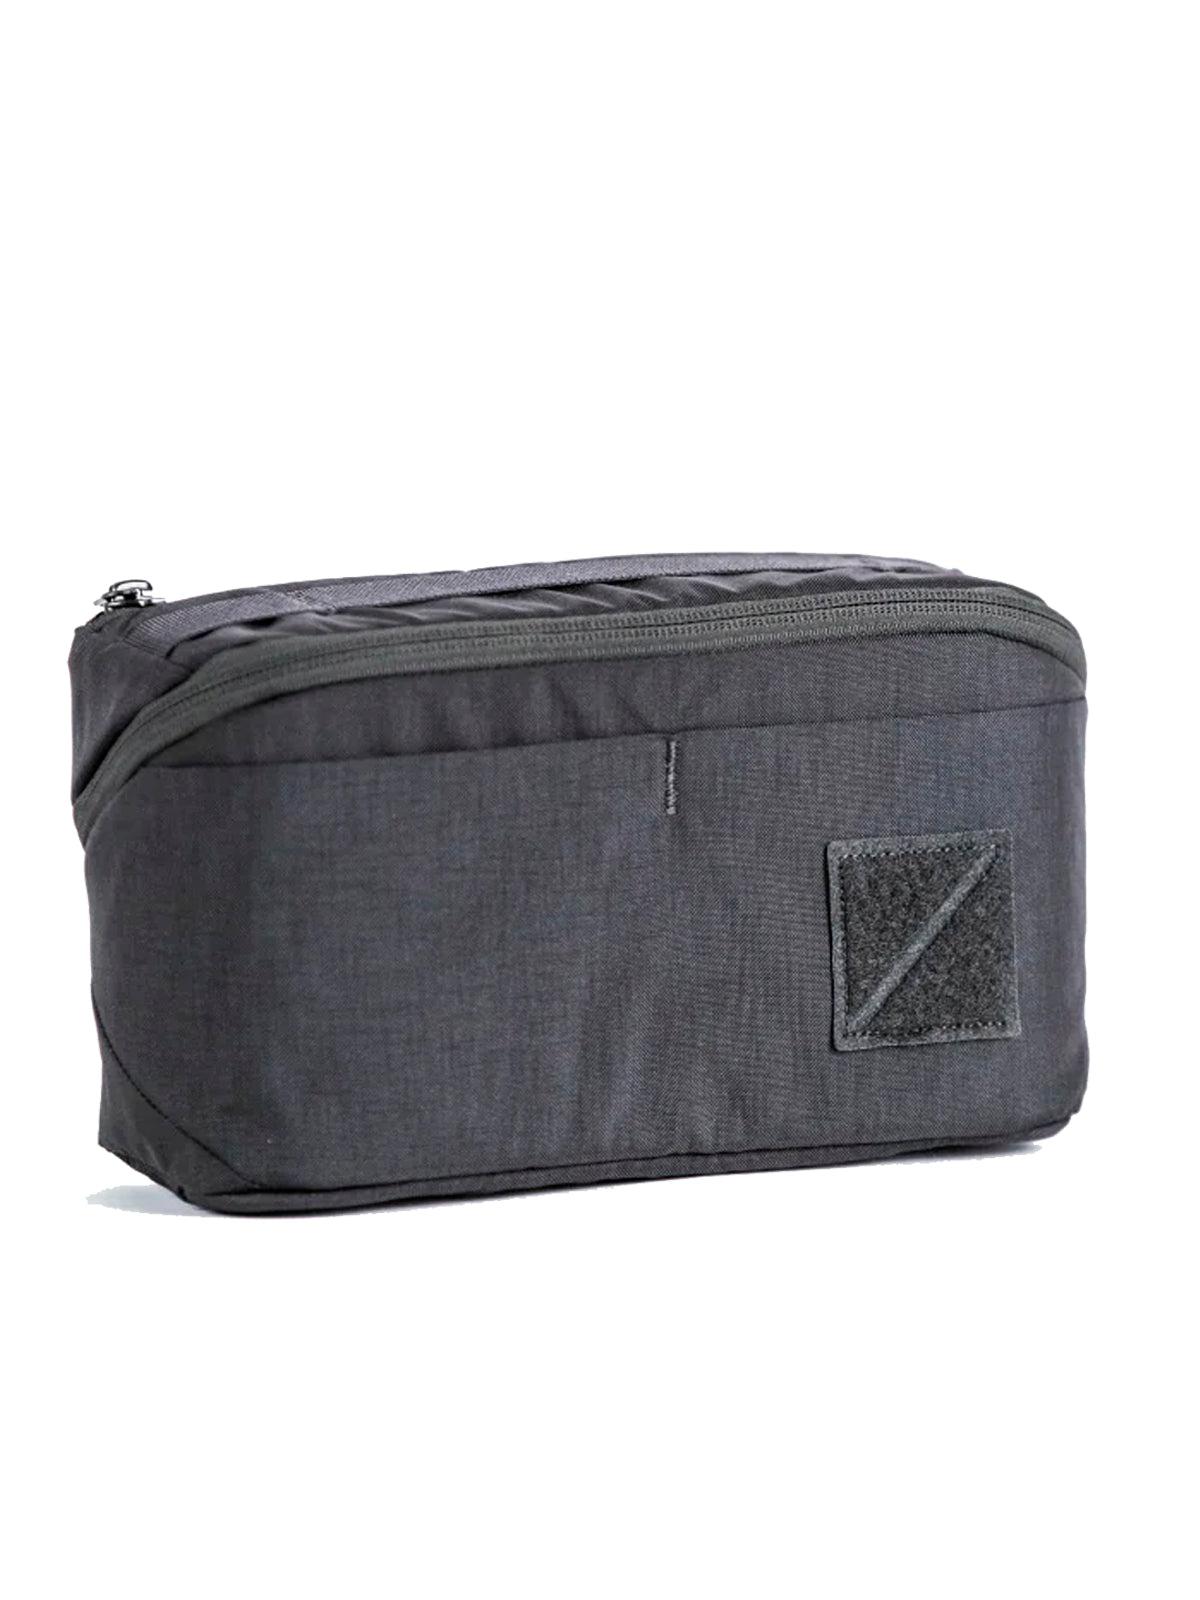 Evergoods Civic Access Pouch 2L Slate Grey